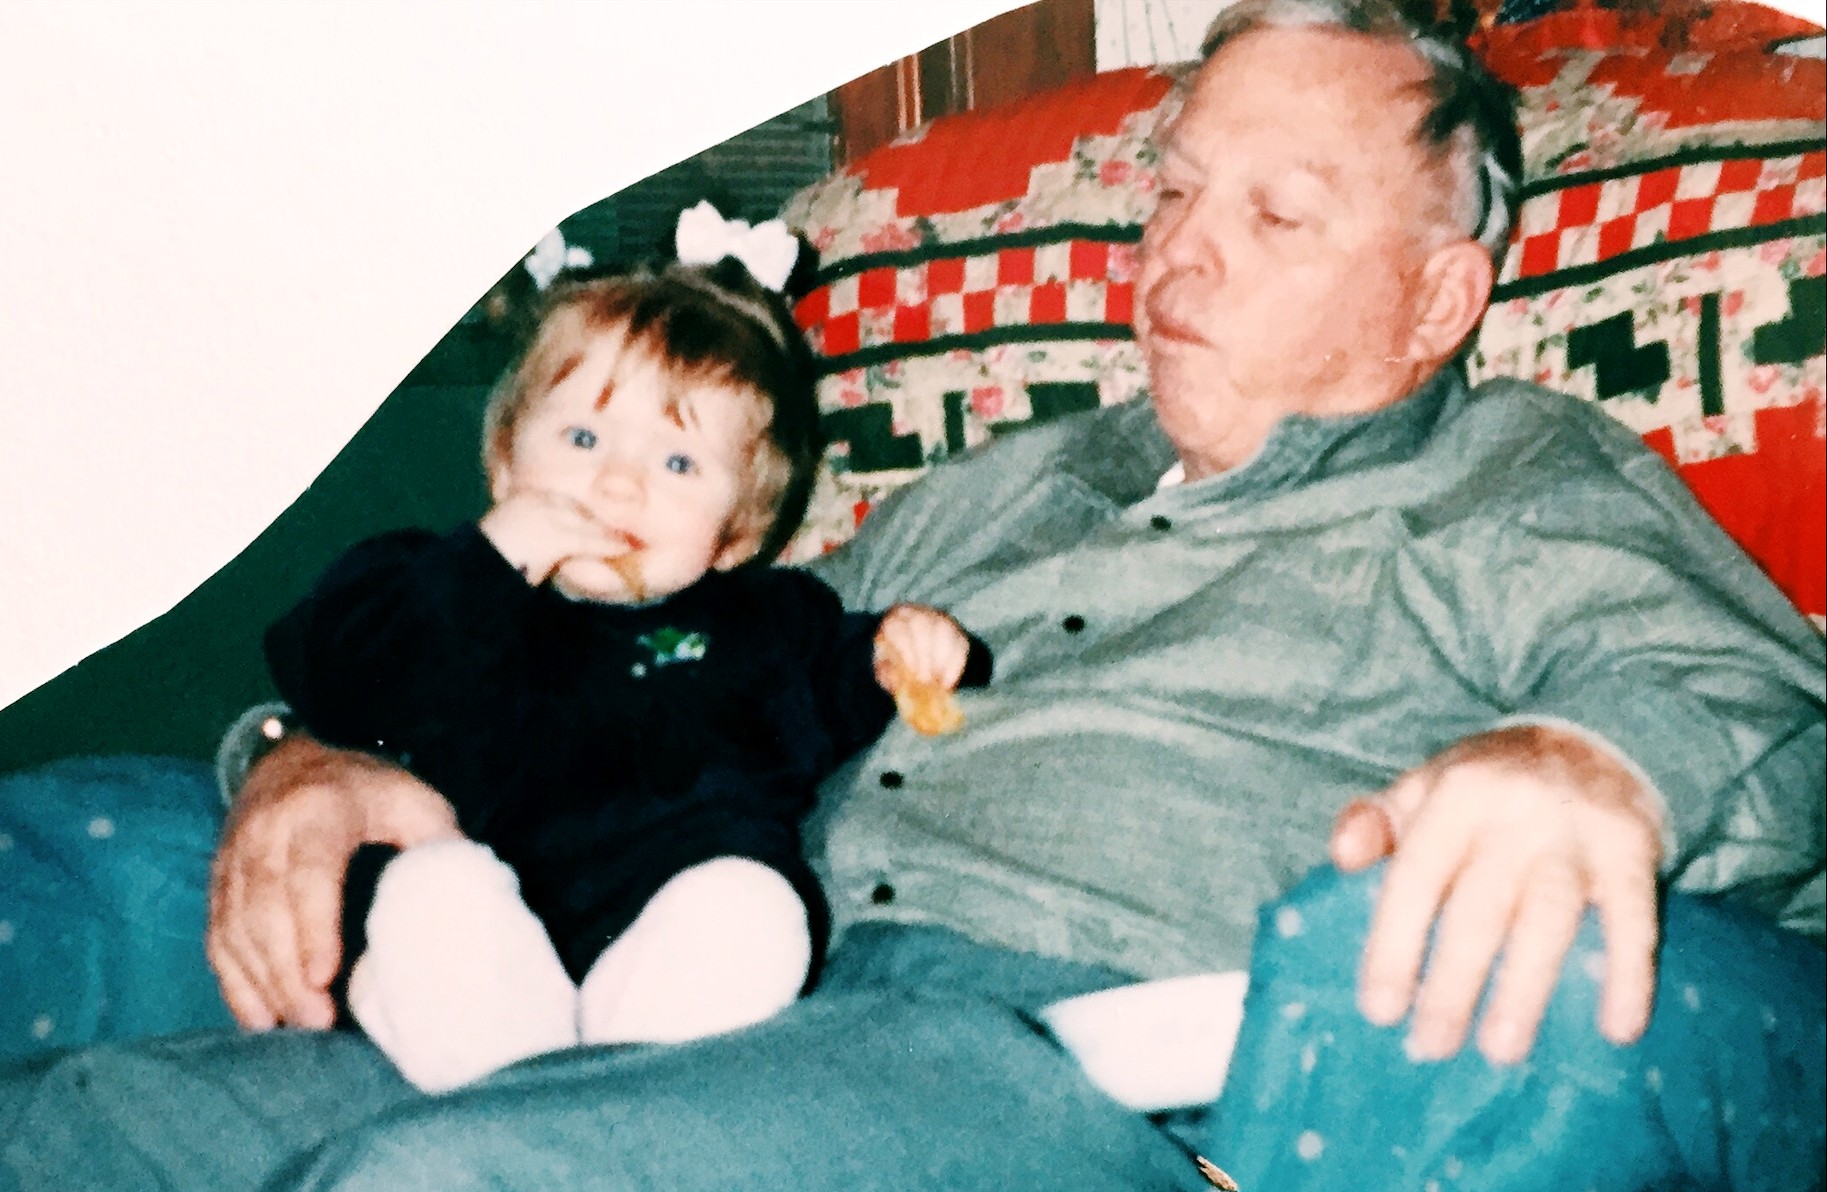 A toddler sitting on her grandpa's lap.